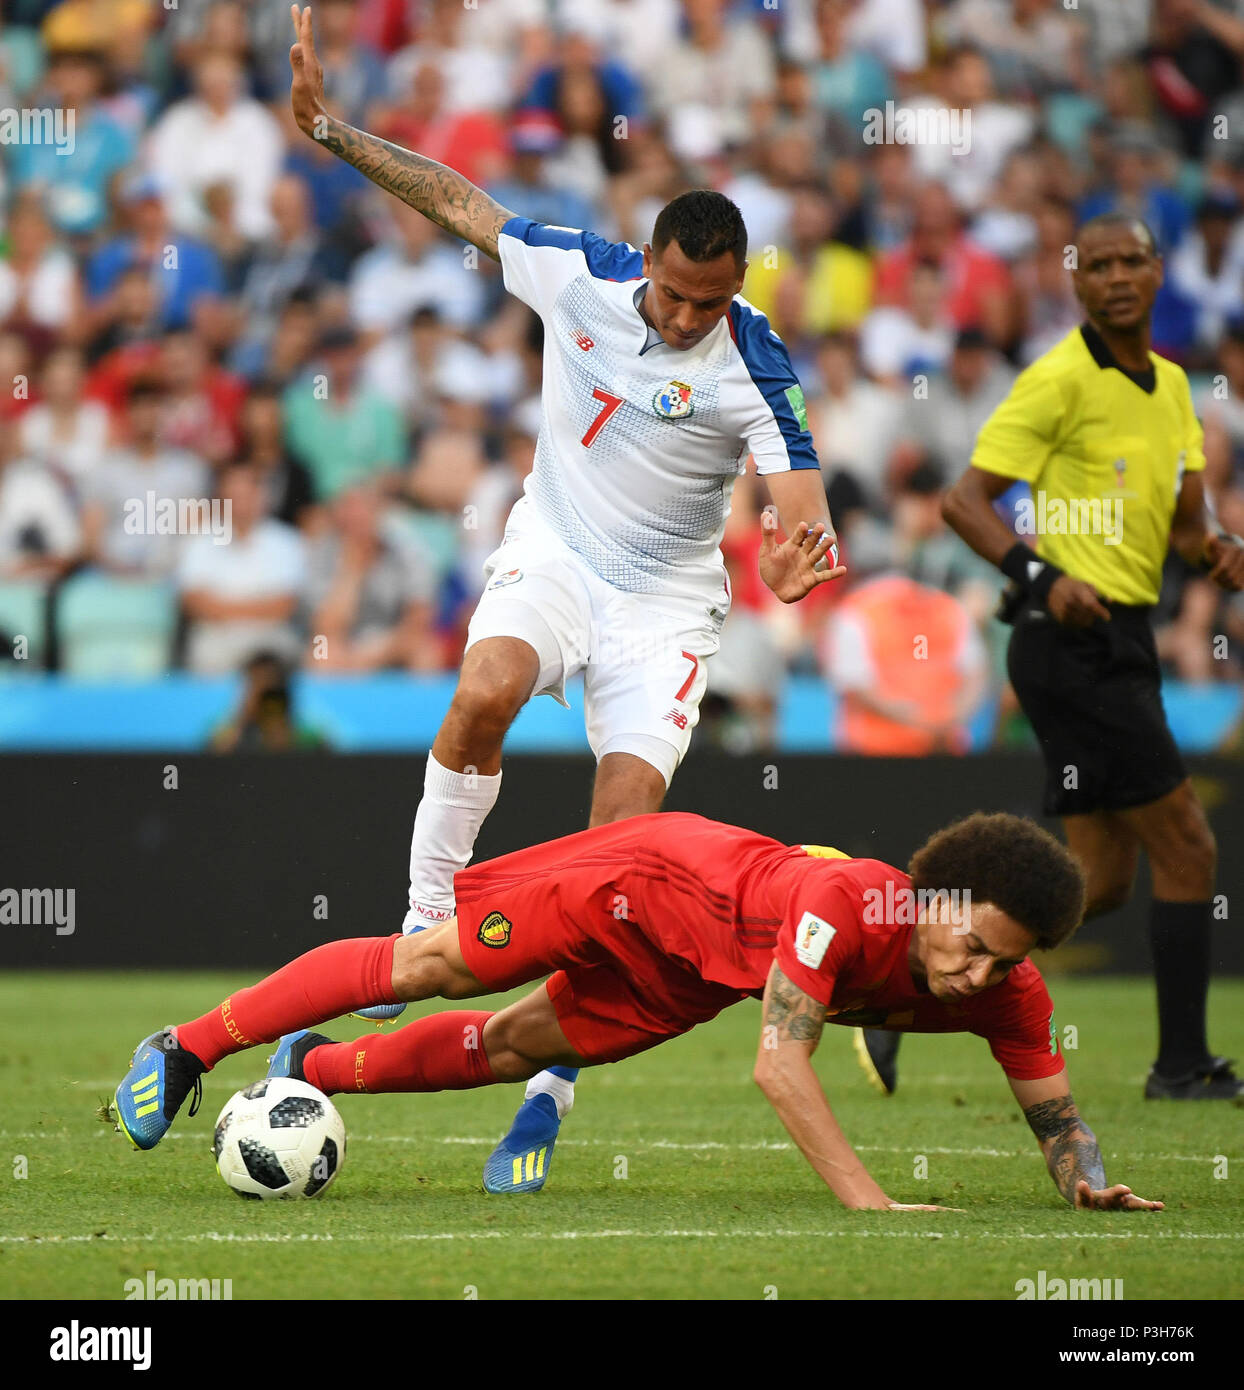 Sochi, Russia. 18th June, 2018. Axel Witsel (bottom) of Belgium vies with Blas Perez of Panama during a group G match between Belgium and Panama at the 2018 FIFA World Cup in Sochi, Russia, June 18, 2018. Credit: Du Yu/Xinhua/Alamy Live News Stock Photo